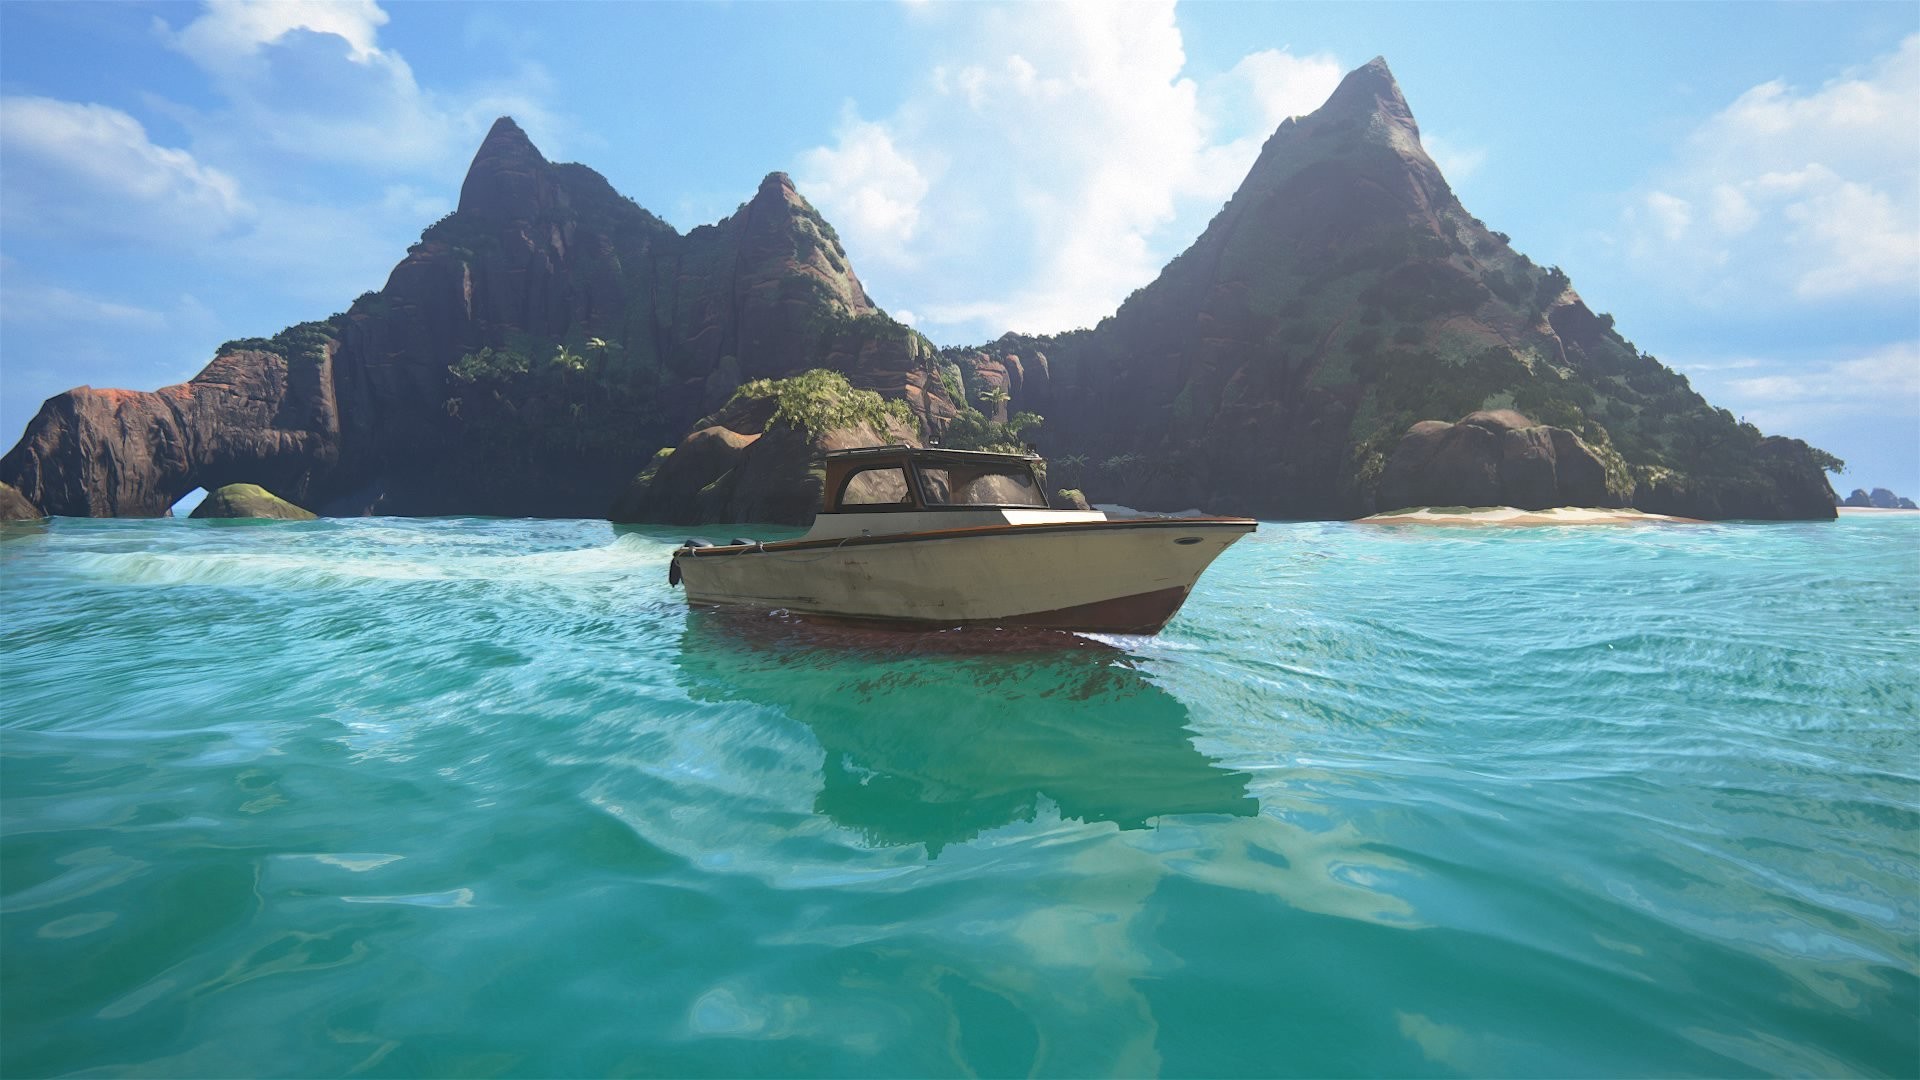 Неизведанные 4. Uncharted 4. Uncharted 4 красота. Uncharted 4 Скриншоты. Uncharted 4 Water.